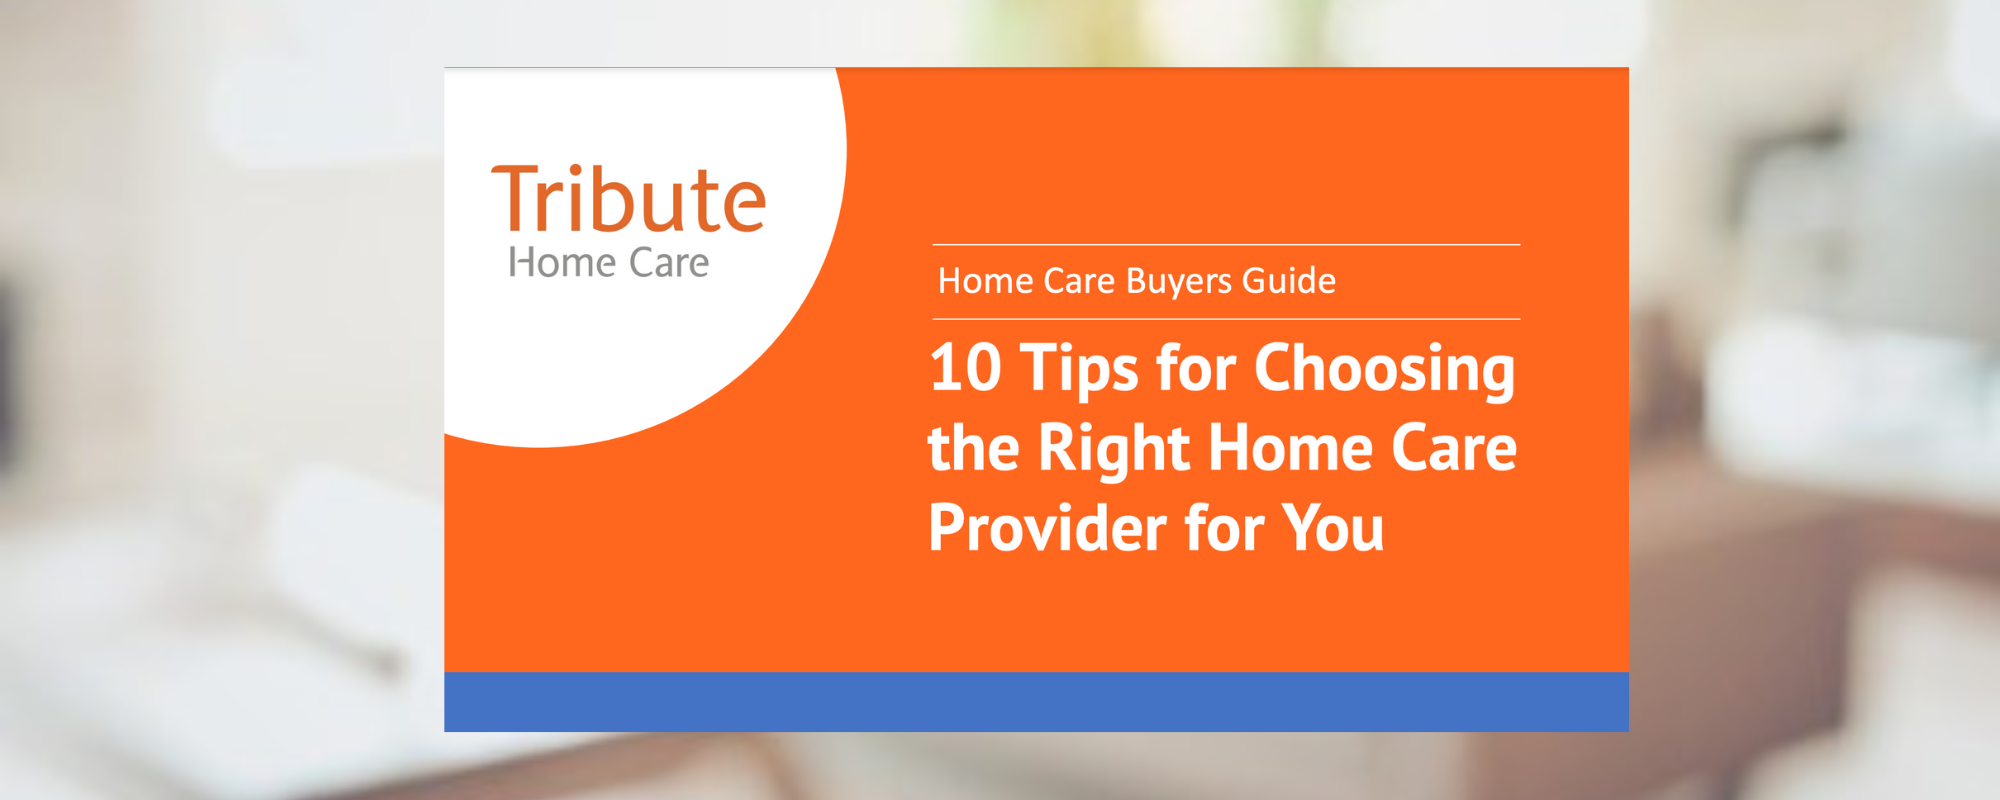 Free Home Care Buyers Guide